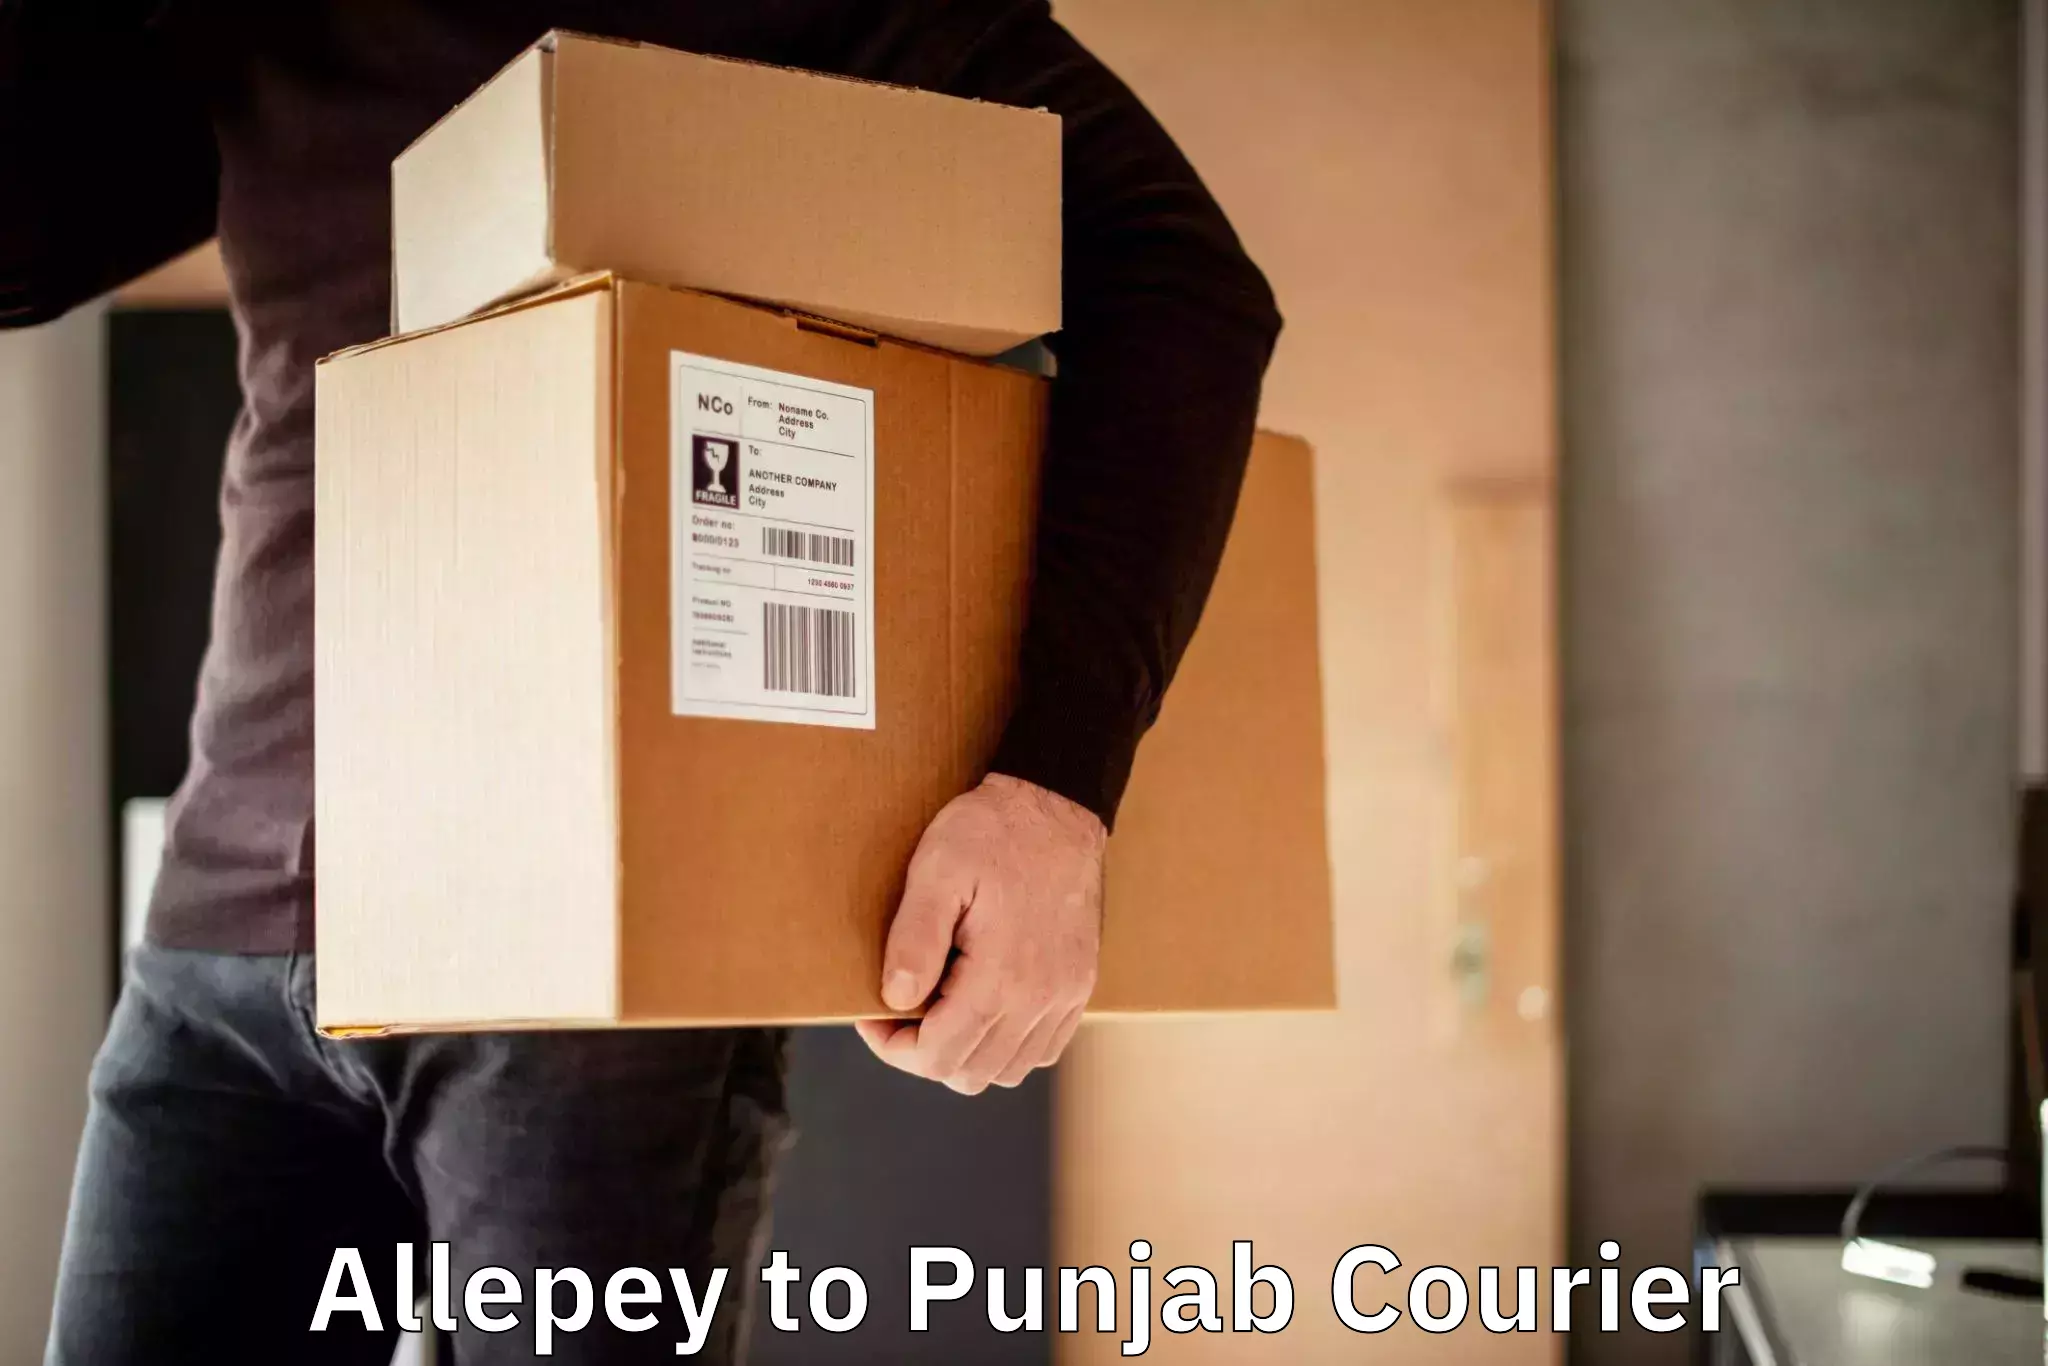 Premium courier services Allepey to Punjab